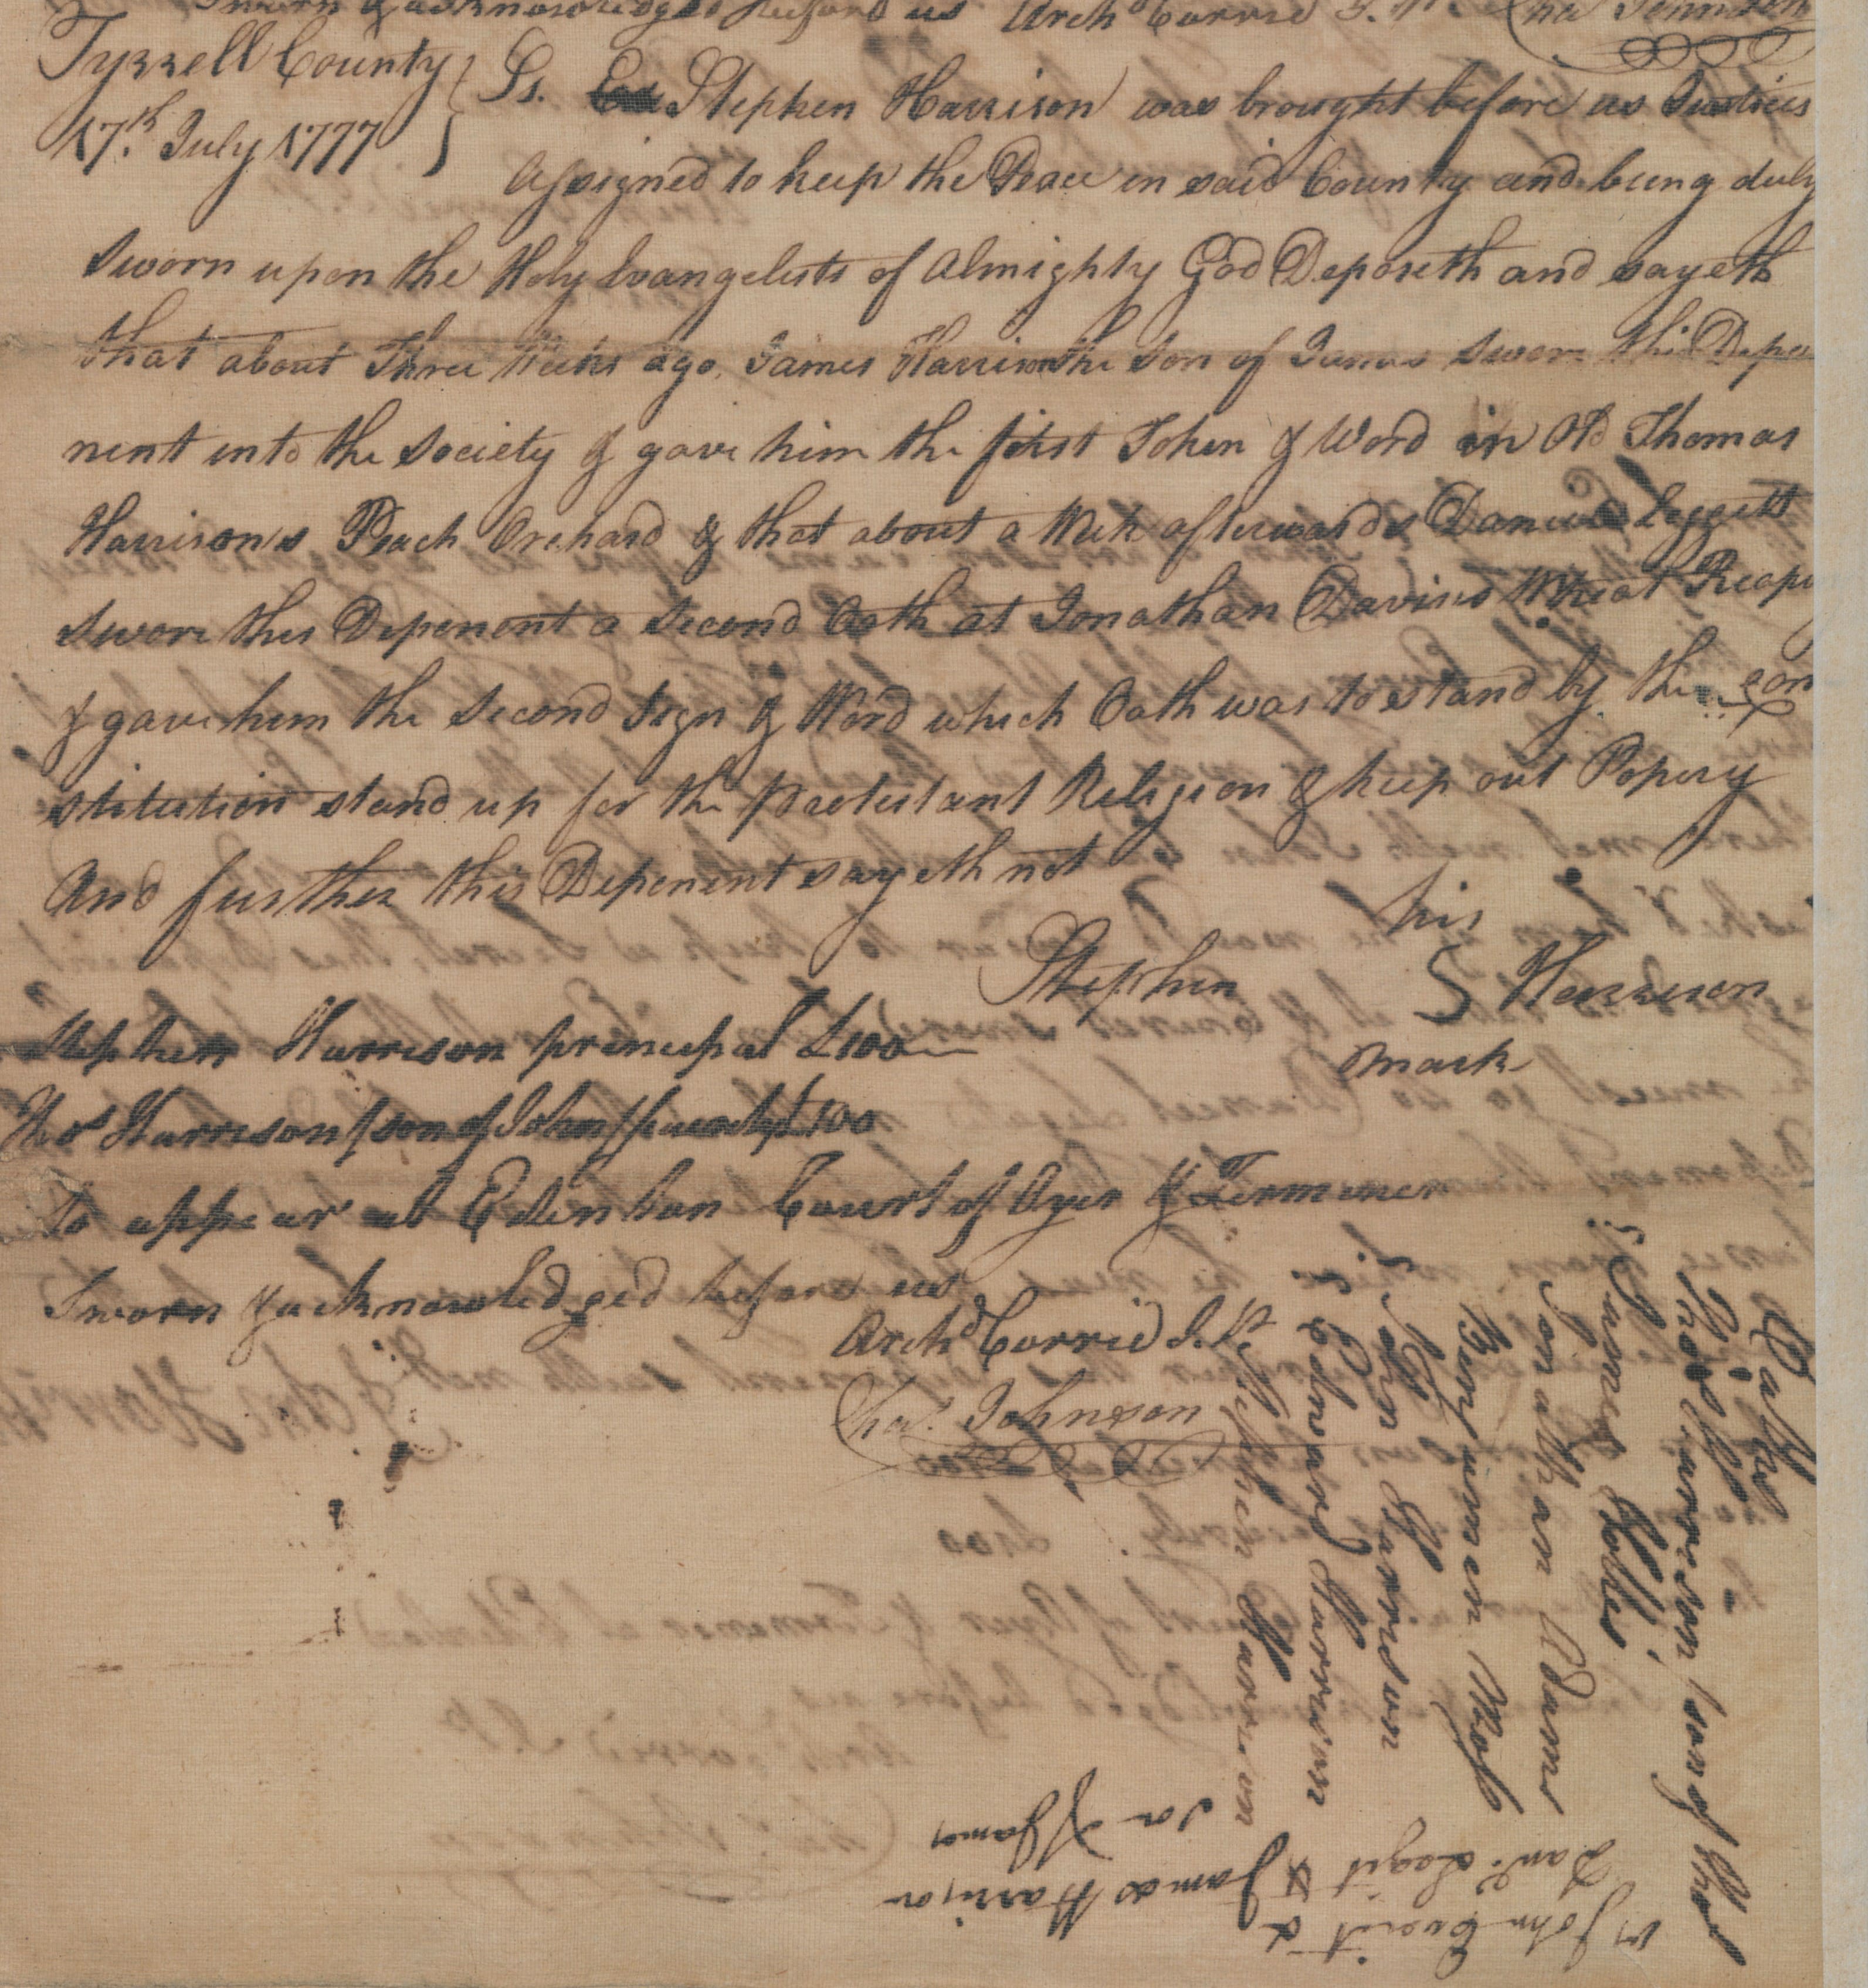 Deposition of Stephen Harrison, 17 July 1777, page 1